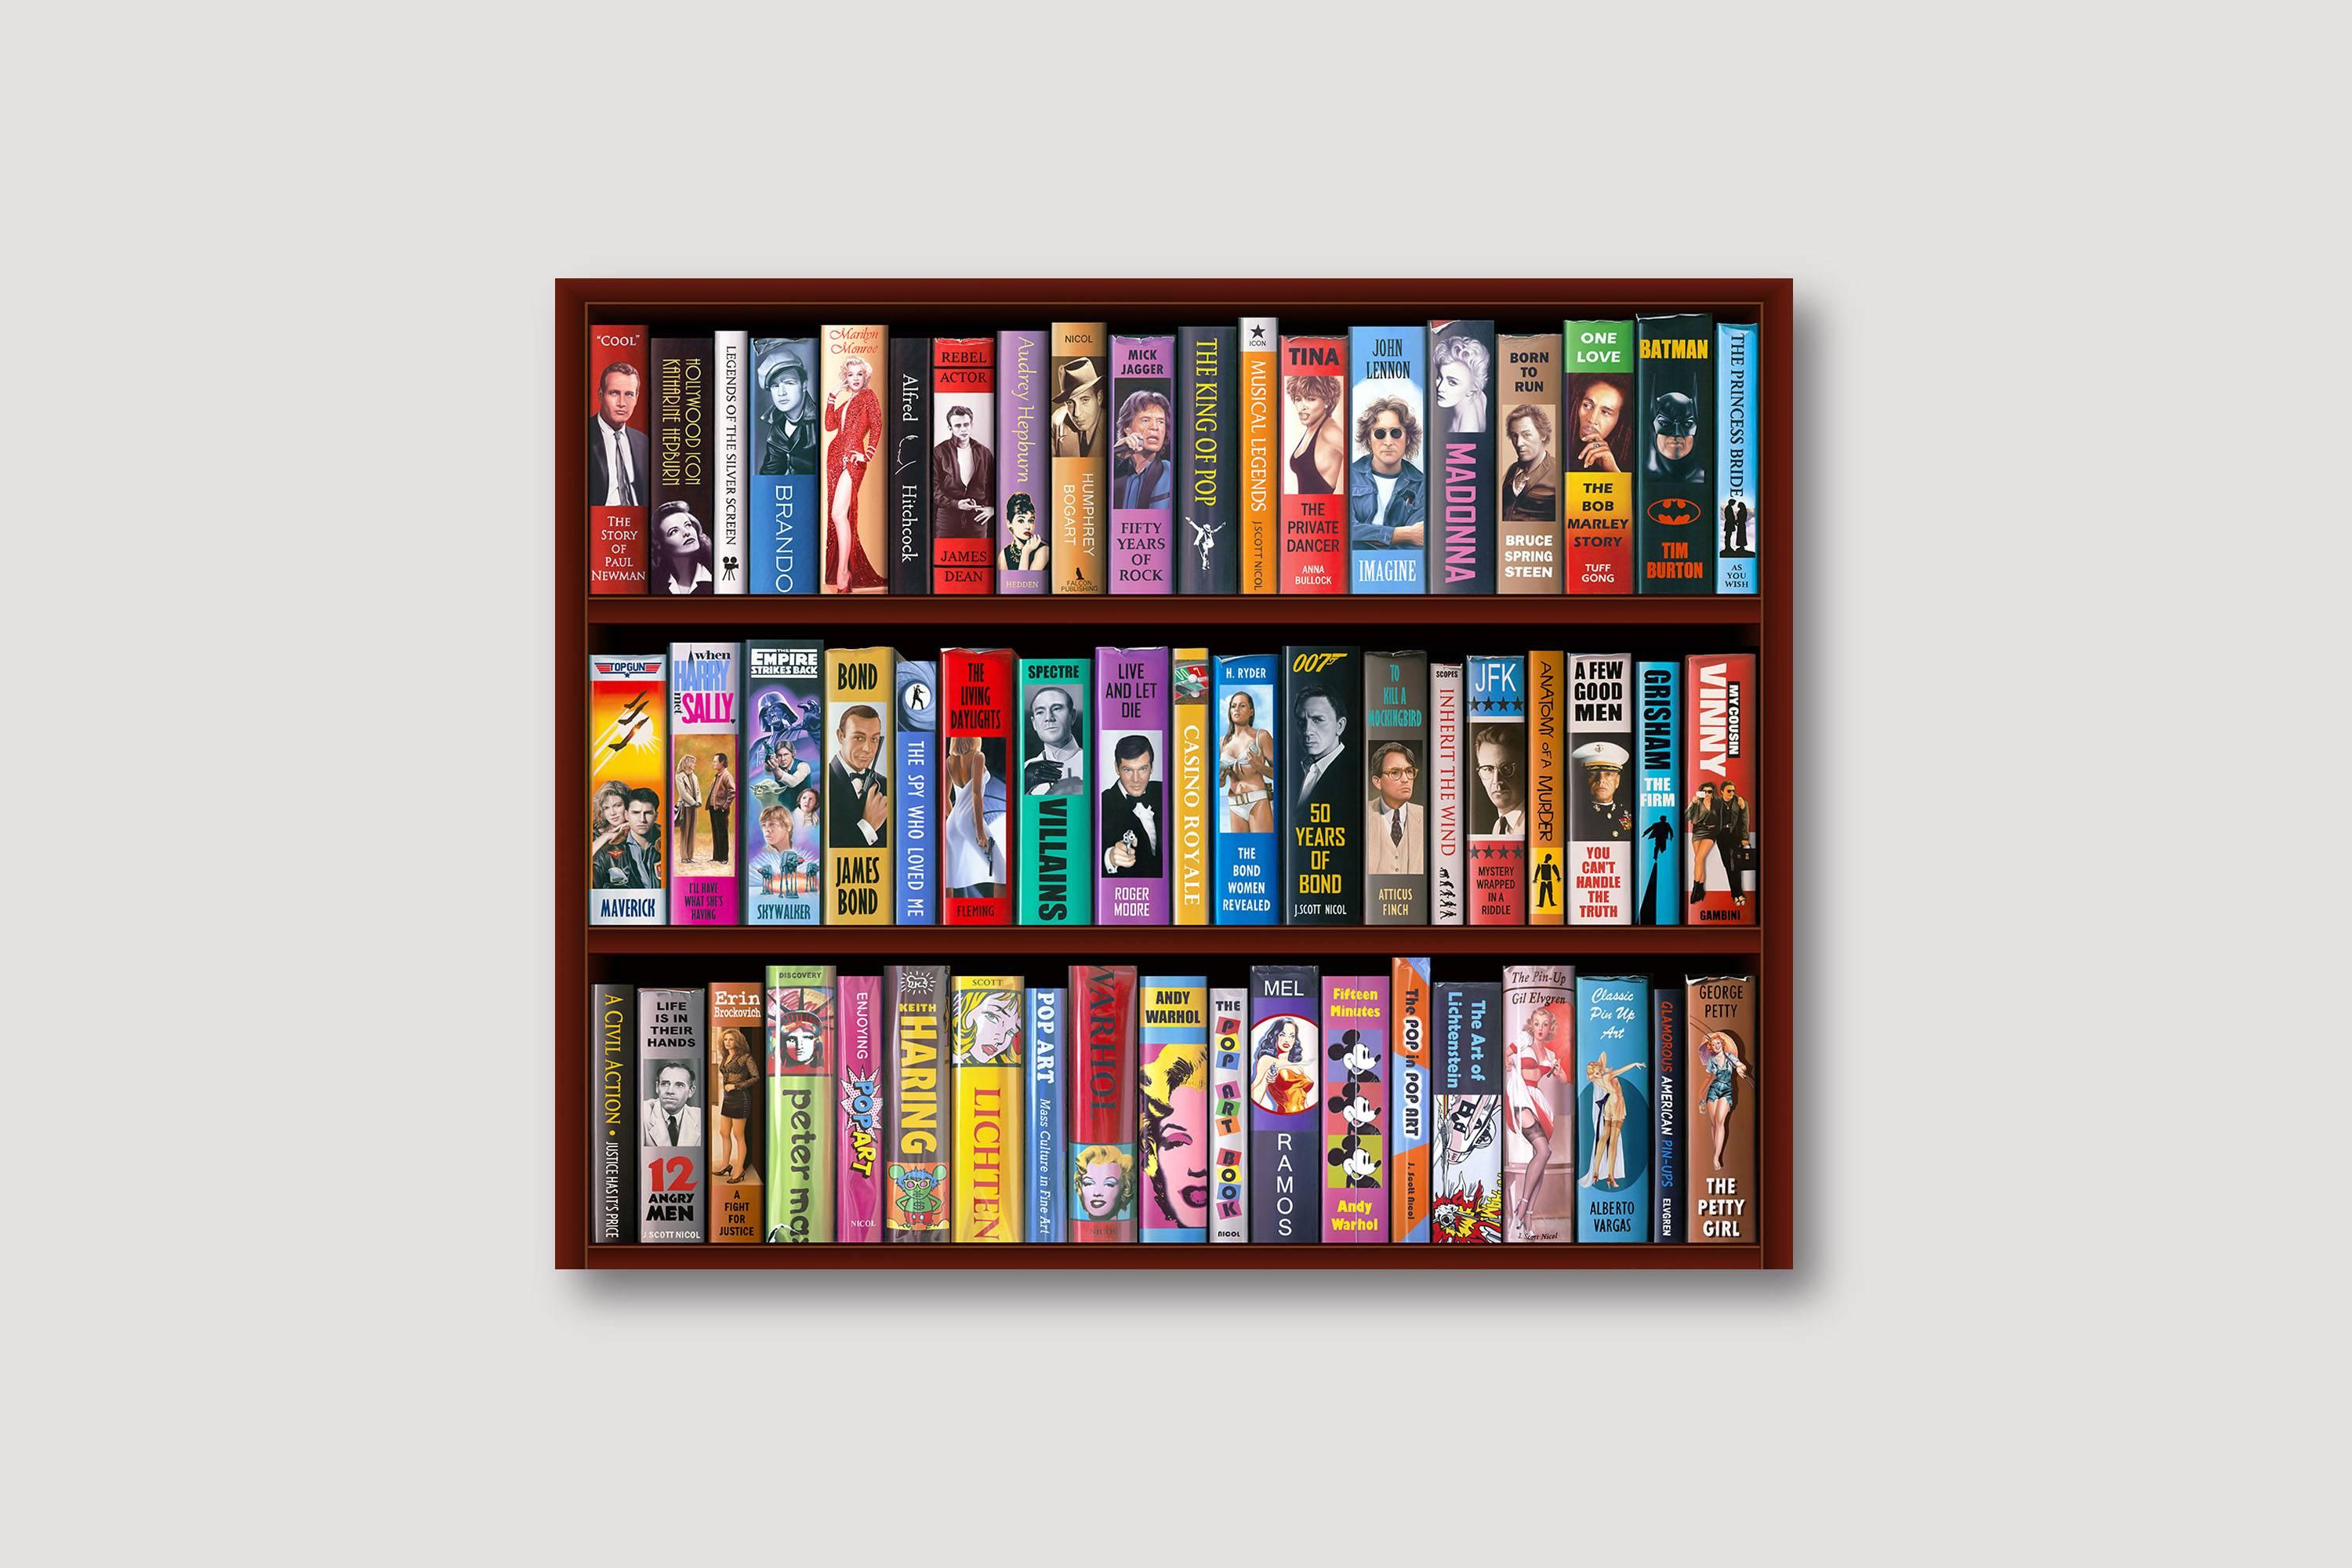 The Petty Girl Bookcase (Signed and Numbered Limited Edition) - Photorealist Print by J. Scott Nicol